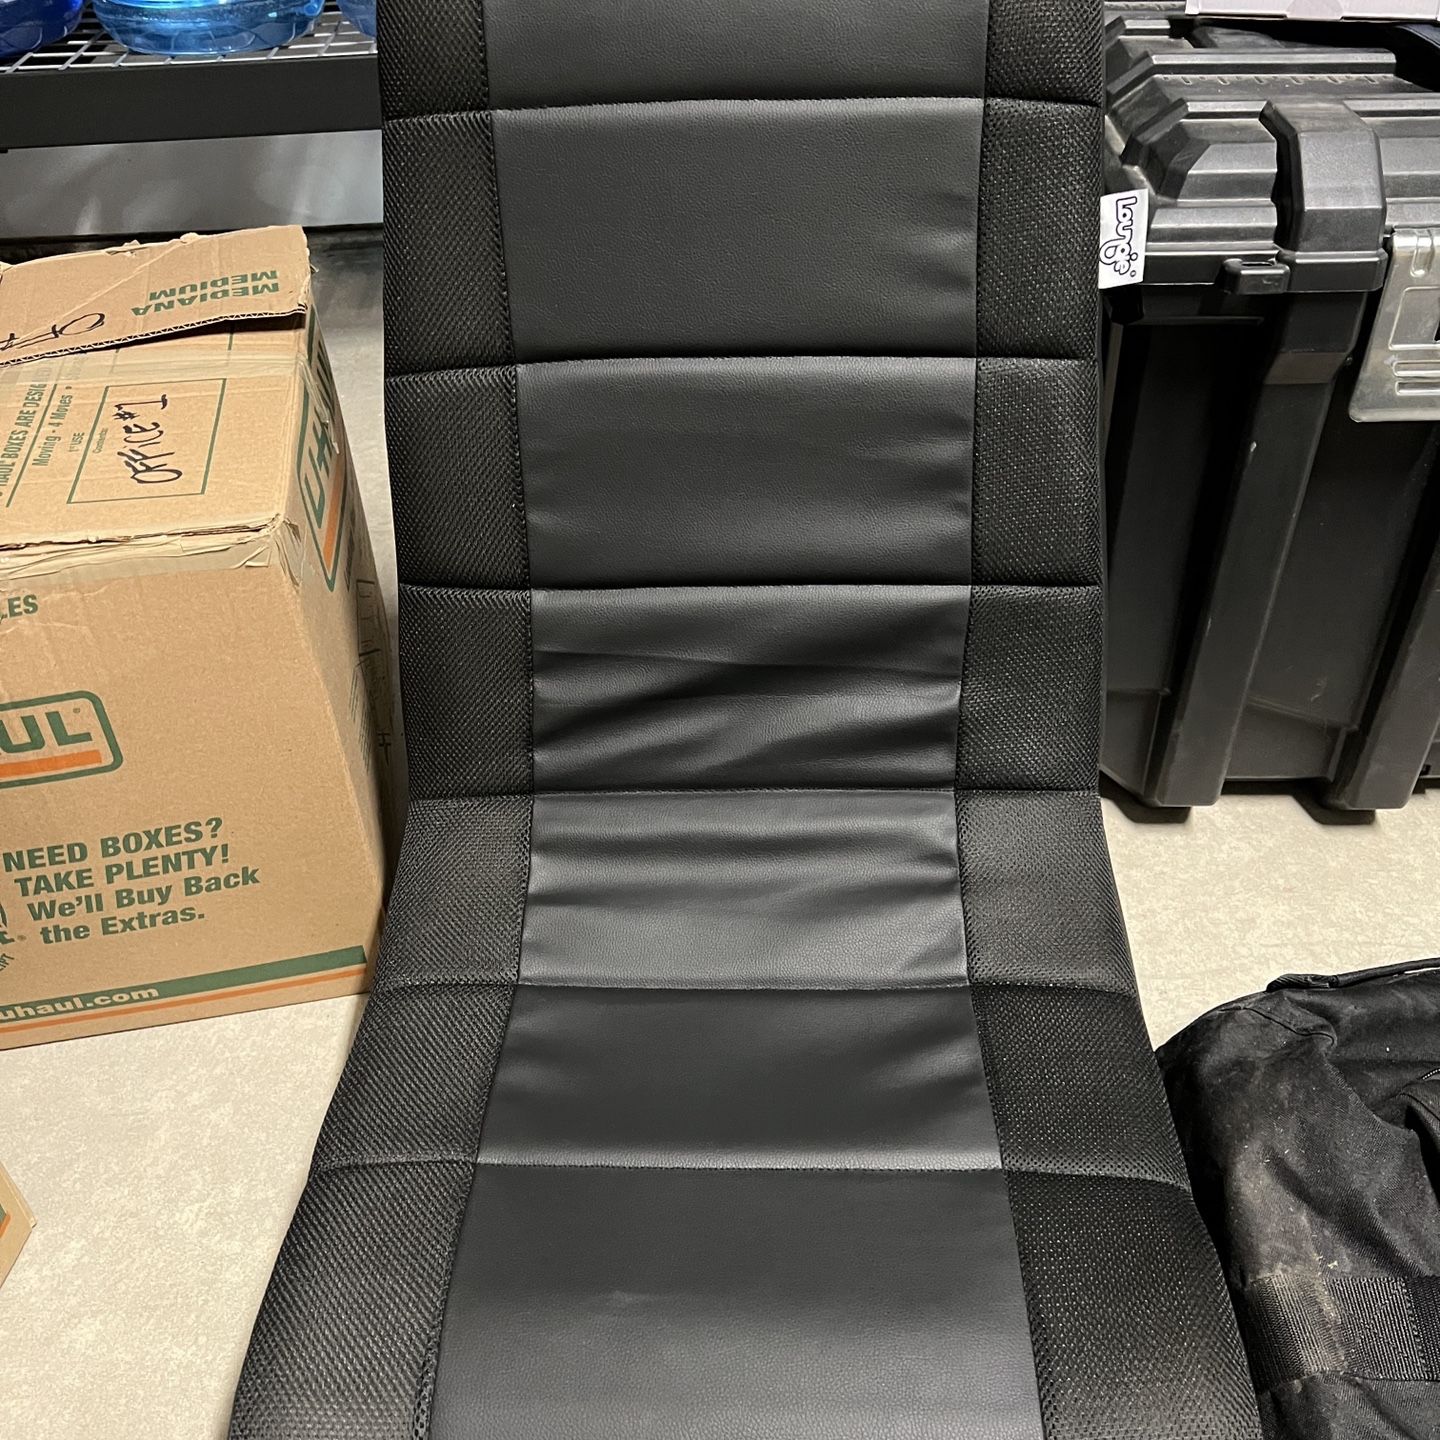 Loungie Gaming Chair